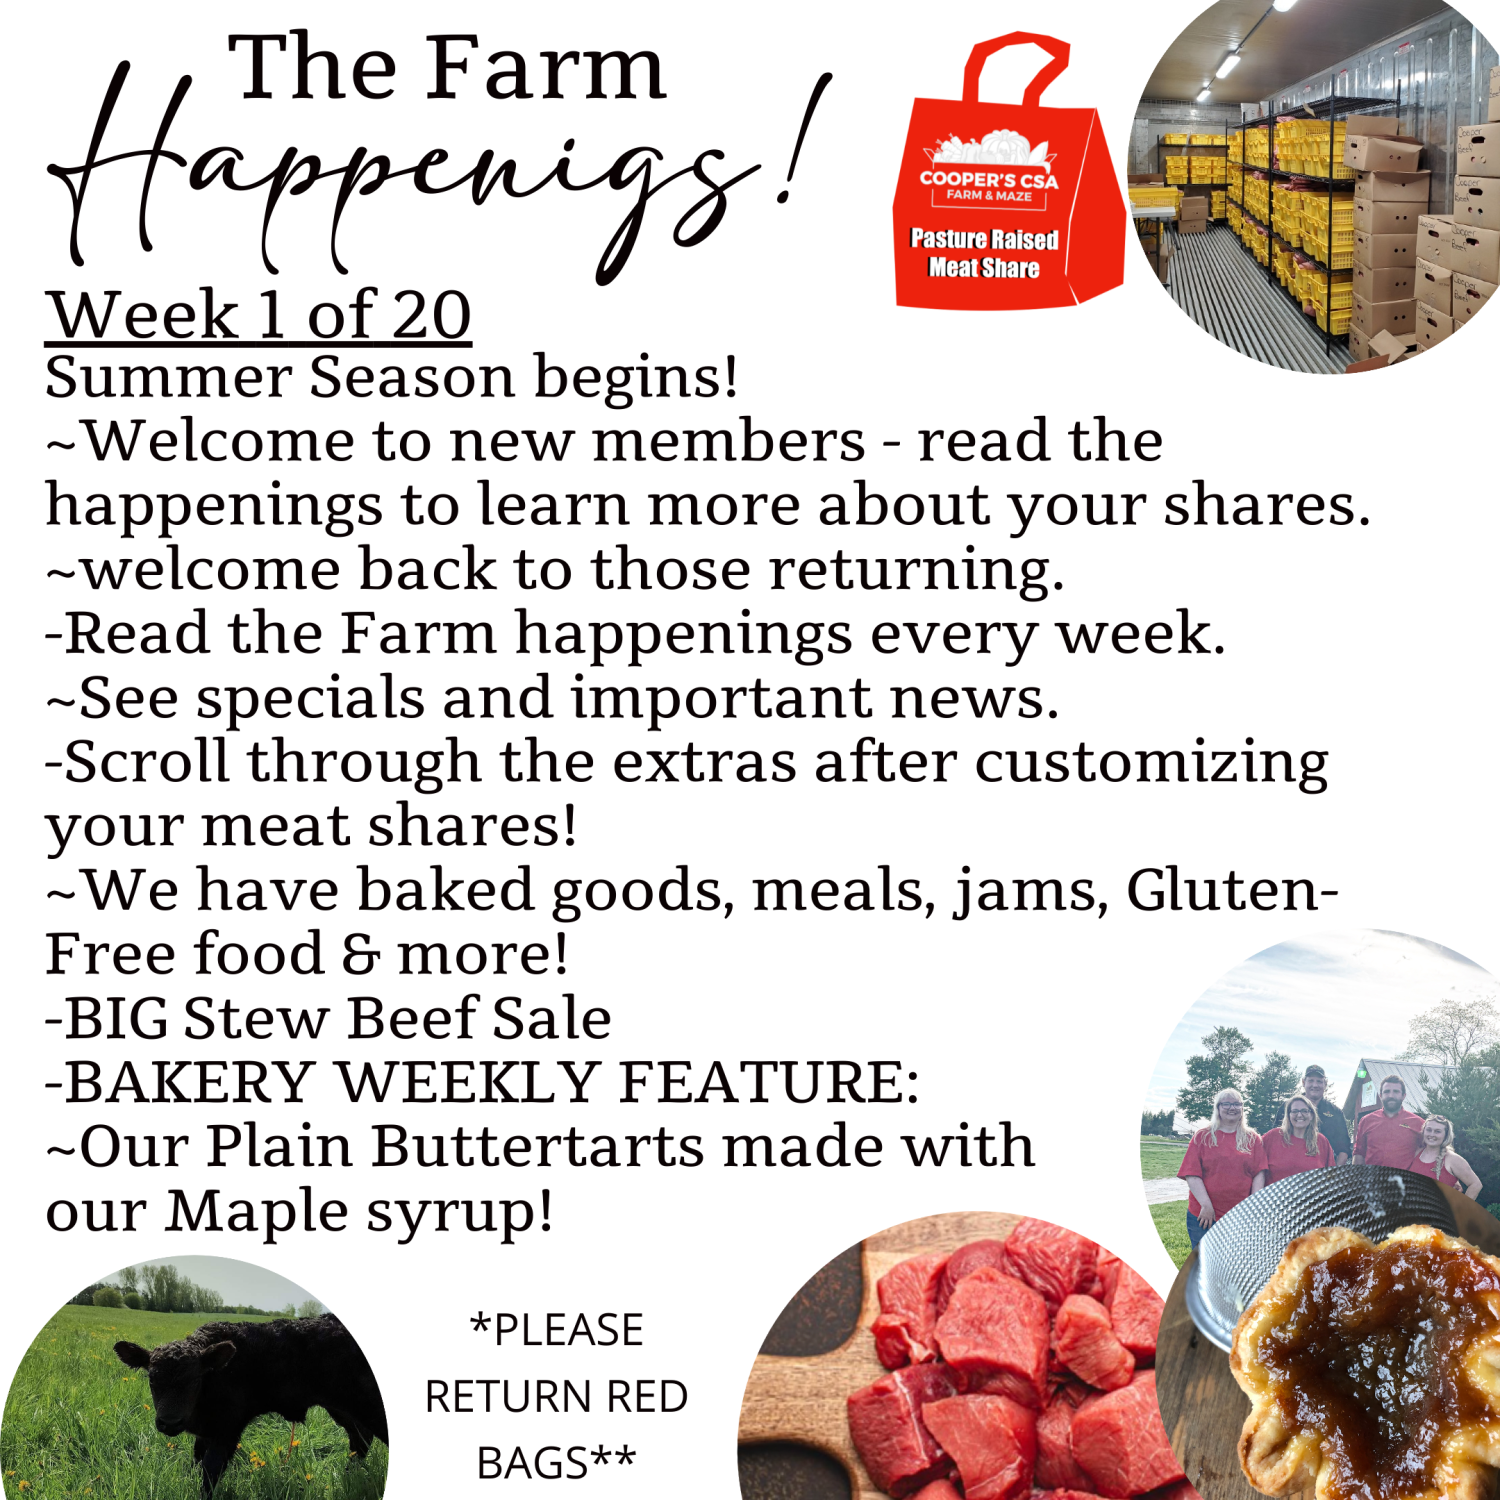 Next Happening: "Pasture Meat Shares"-Coopers CSA Farm Farm Happenings;Week 1 of 20